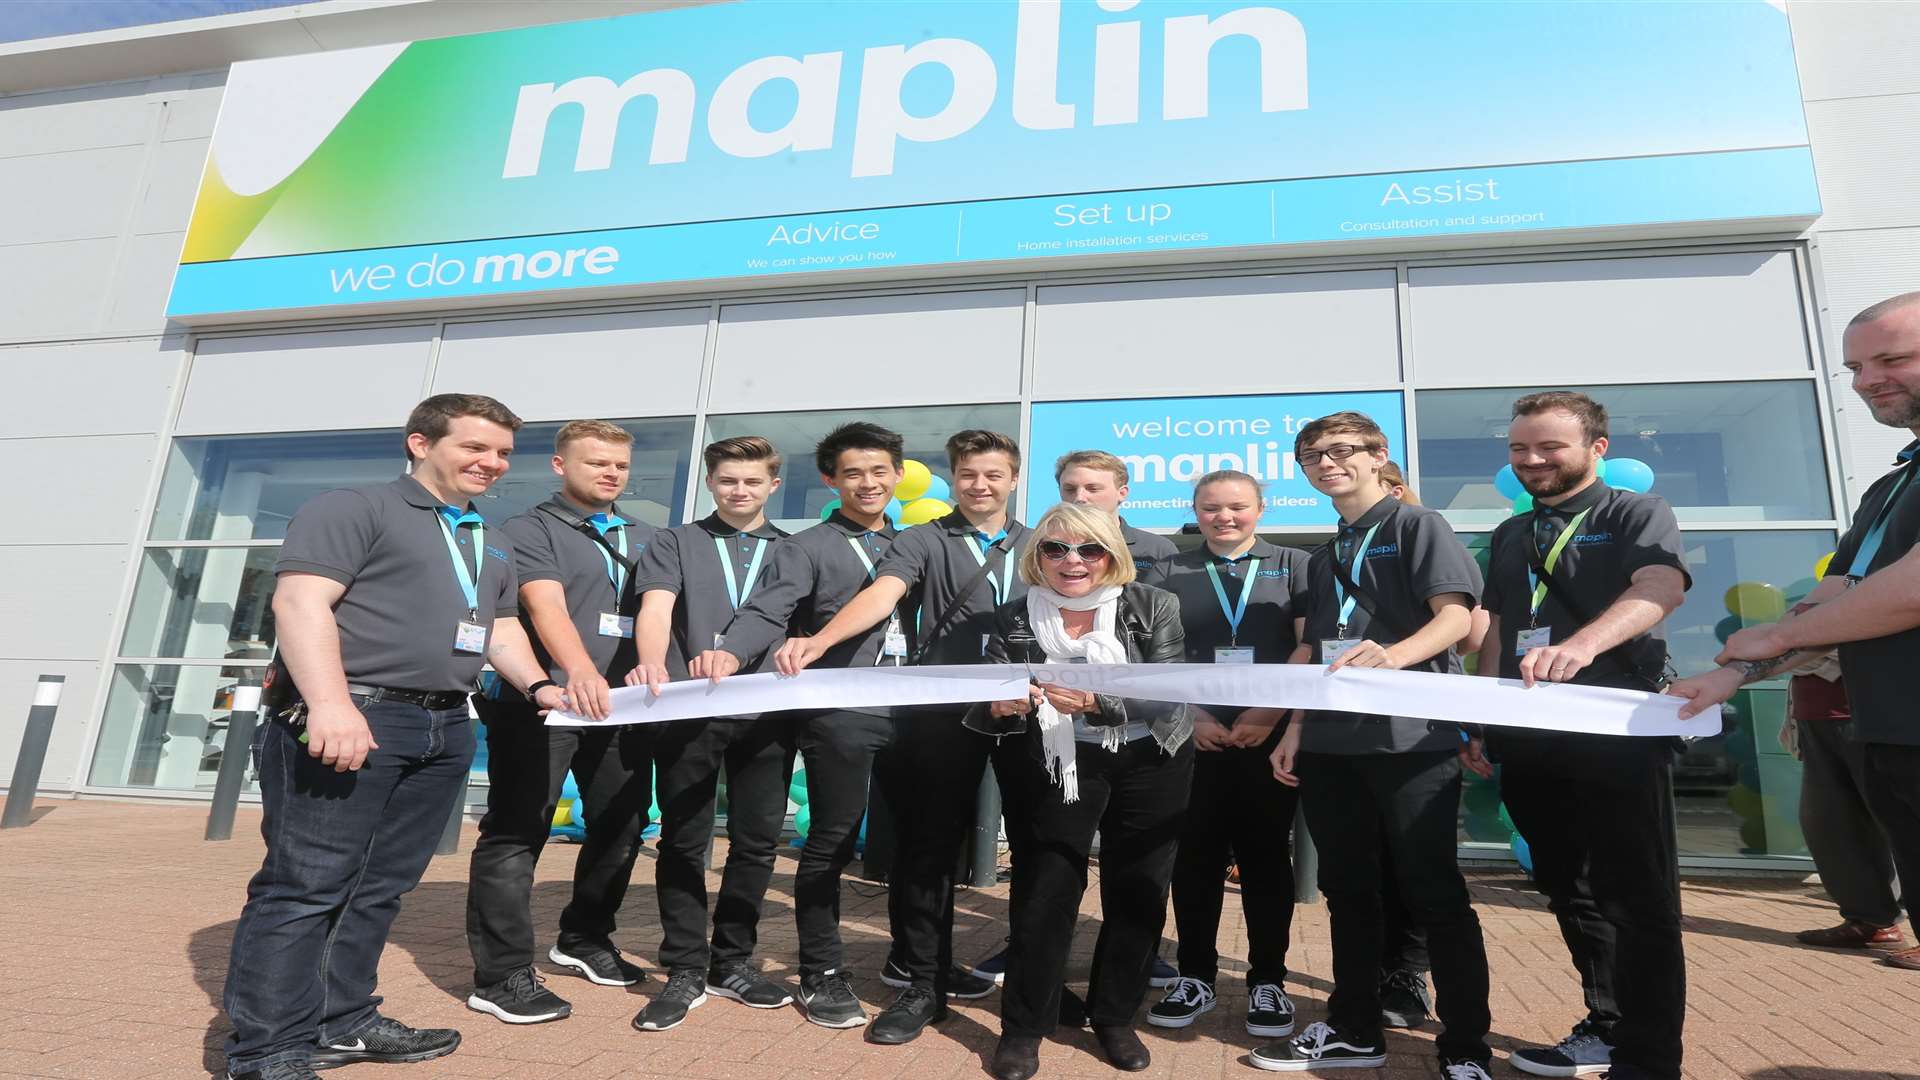 The opening of the new Maplin store in Sittingbourne